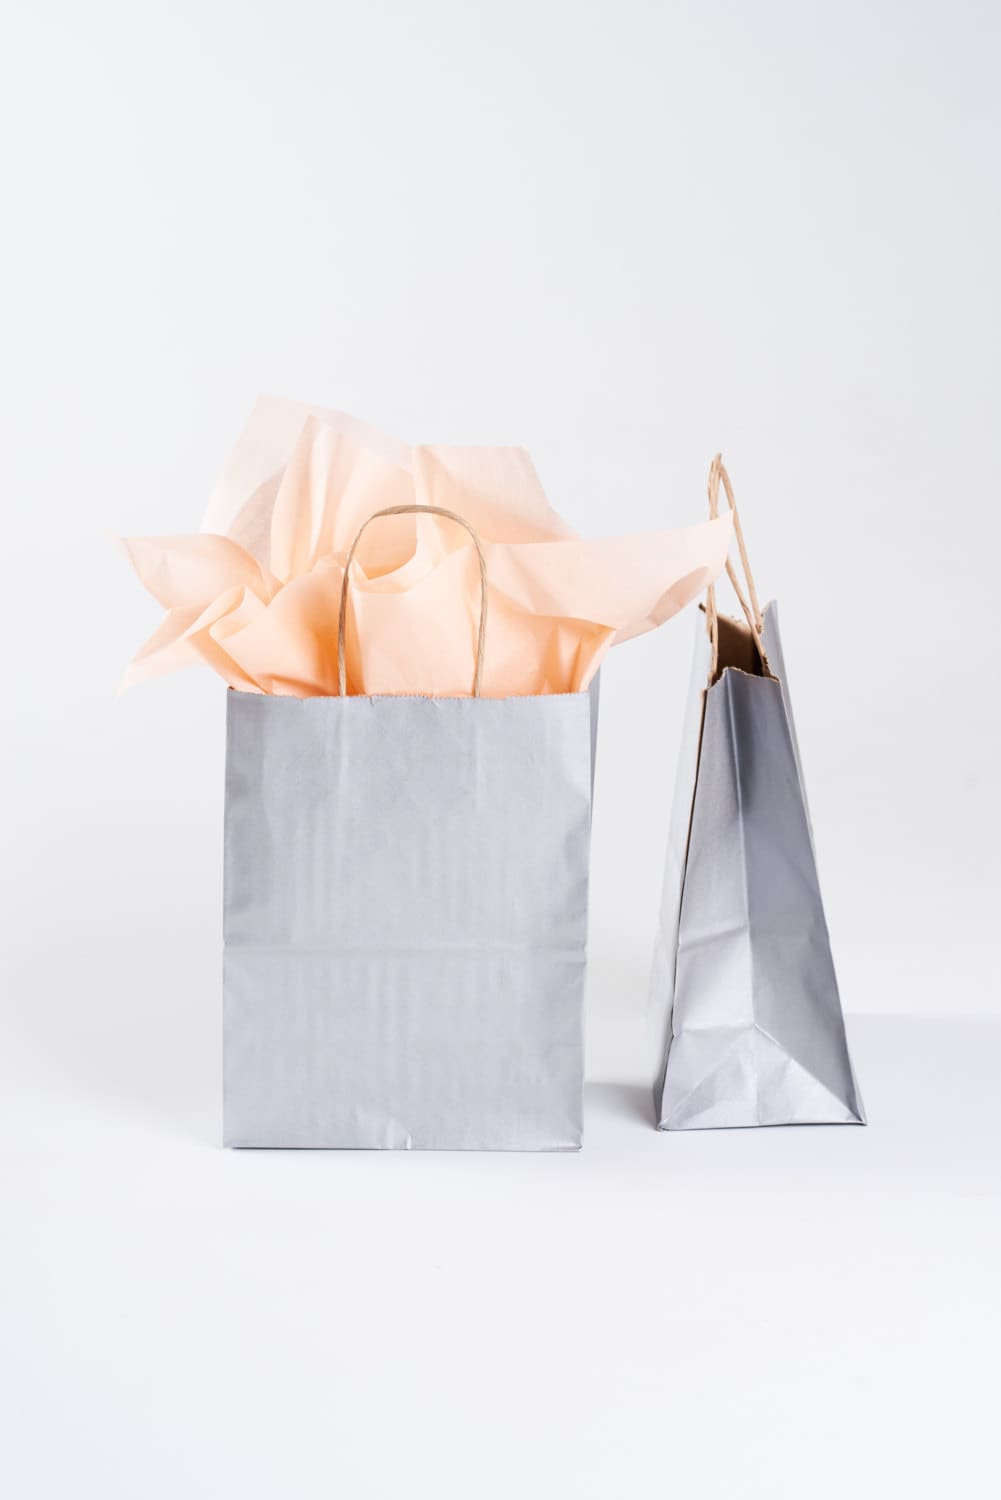 Silver Gift Bags - 3 Count